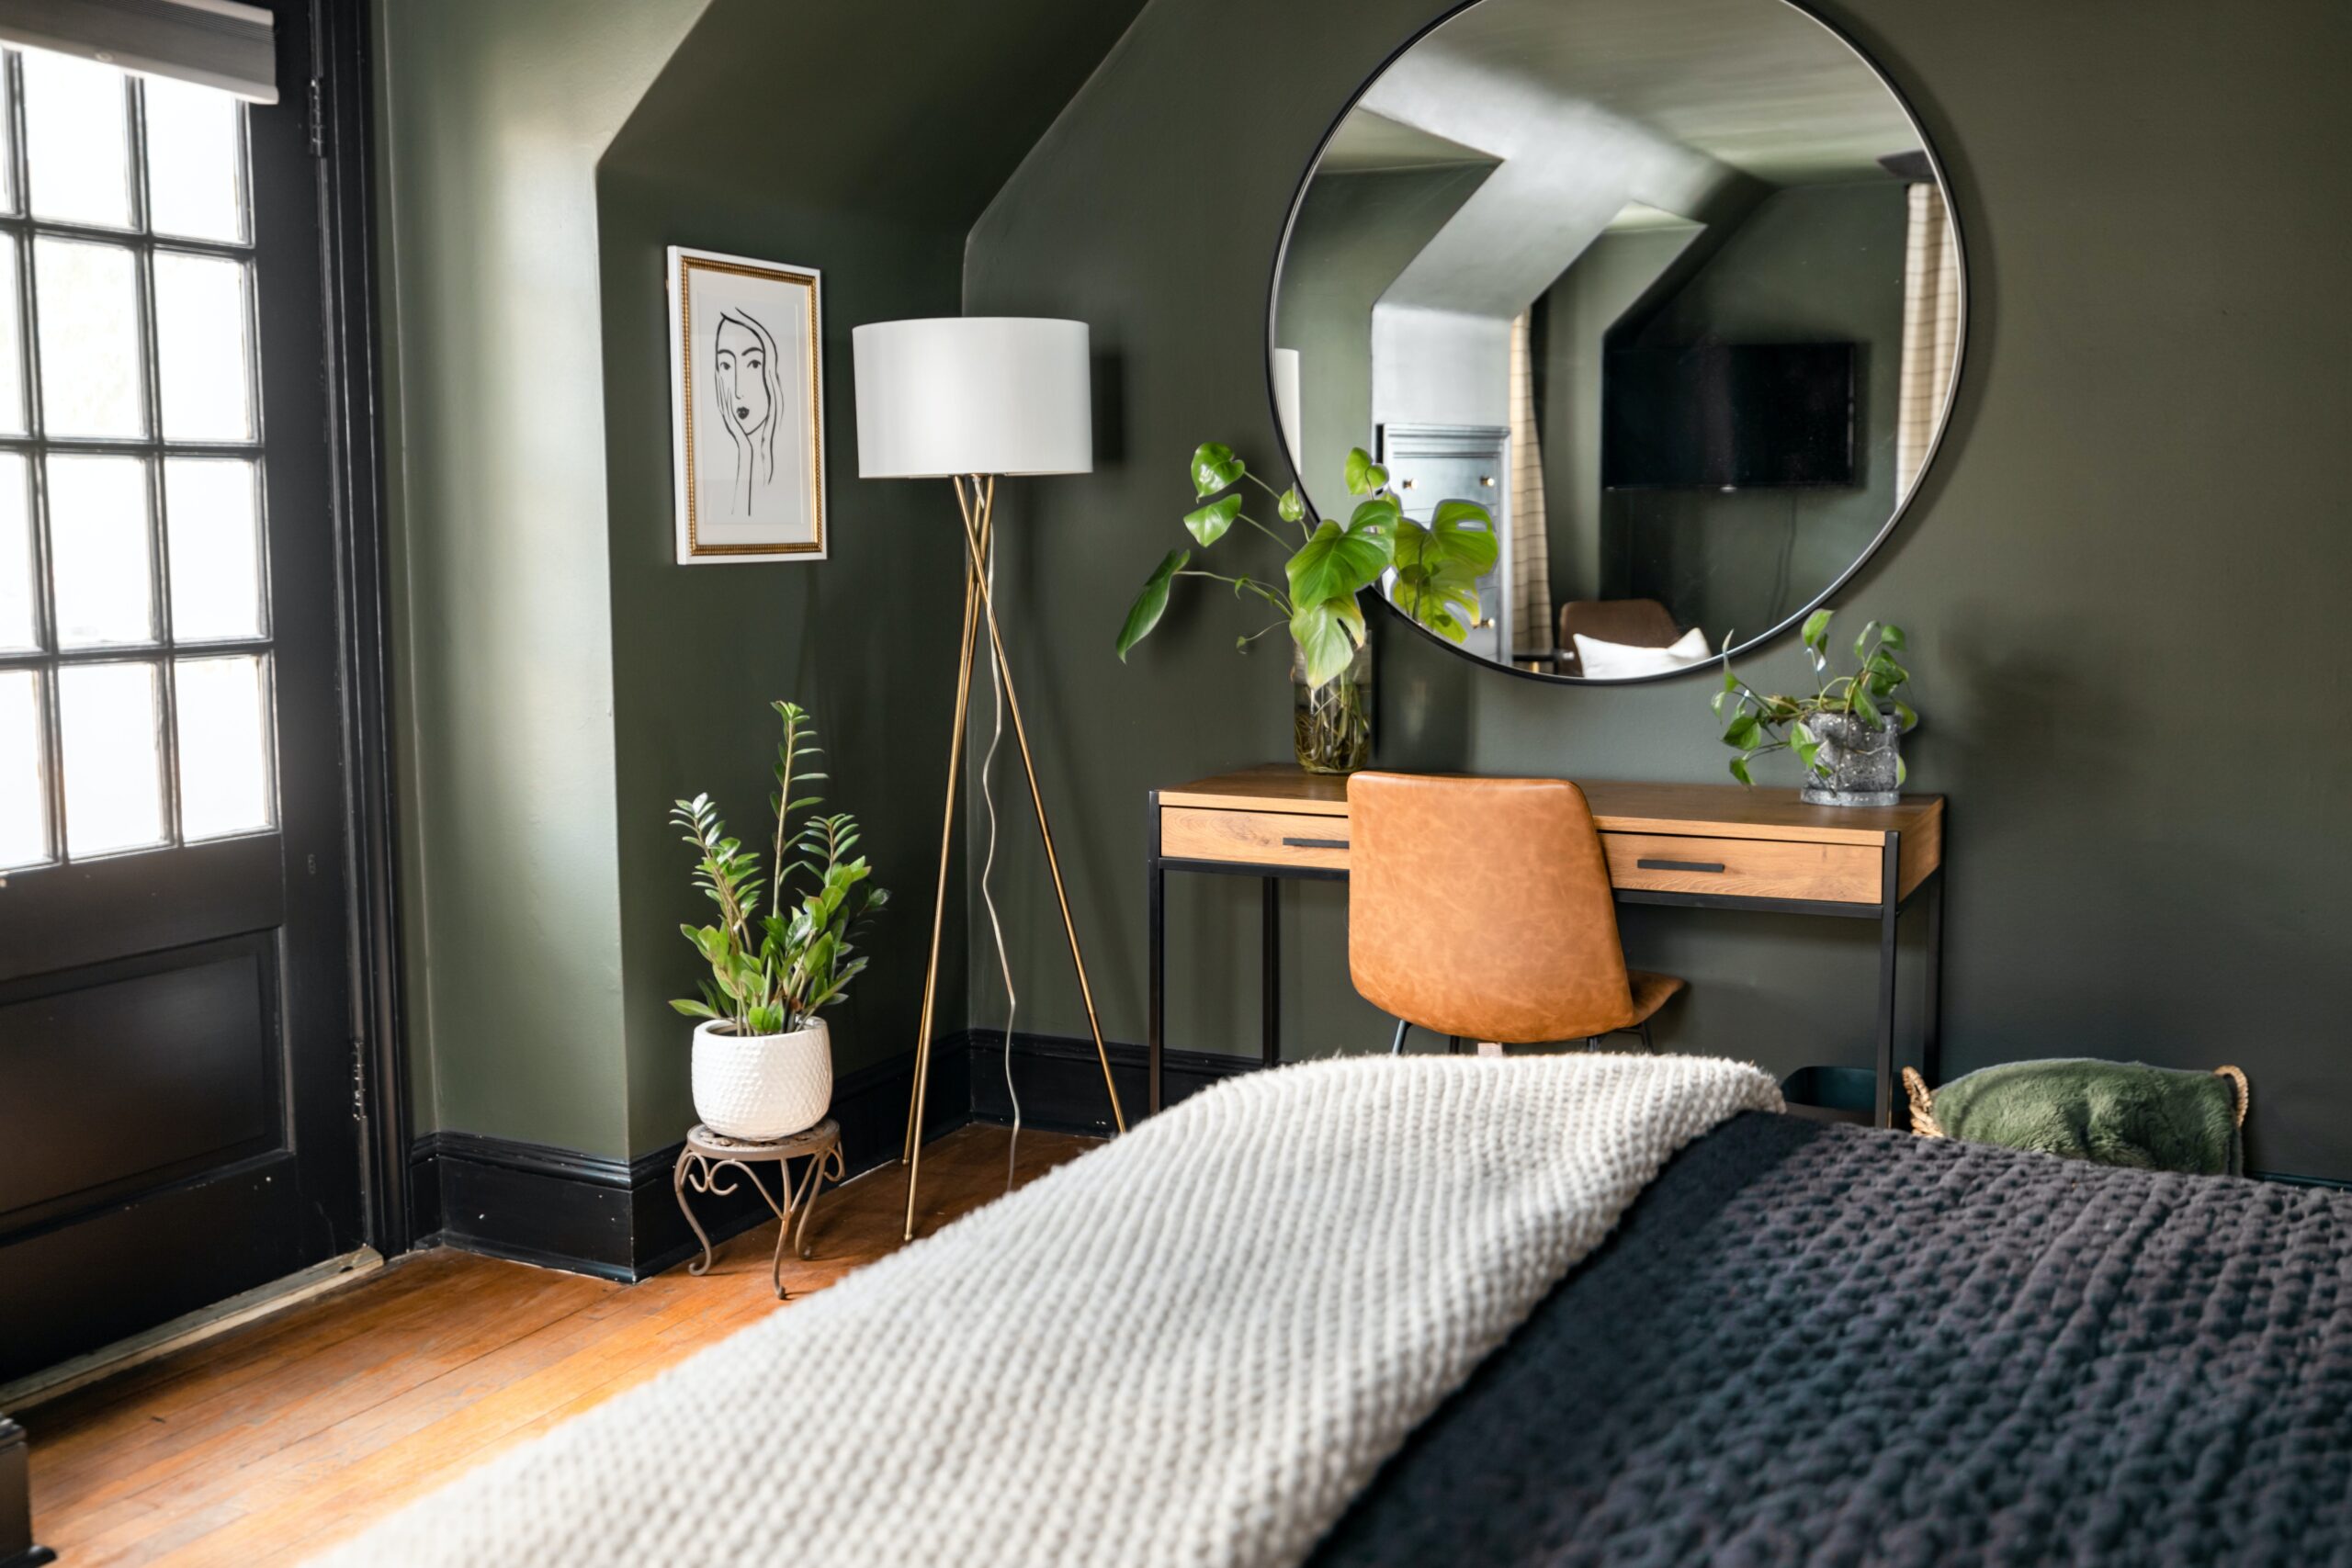 A sage green bedroom with simple decor. Pictured: A bedroom.